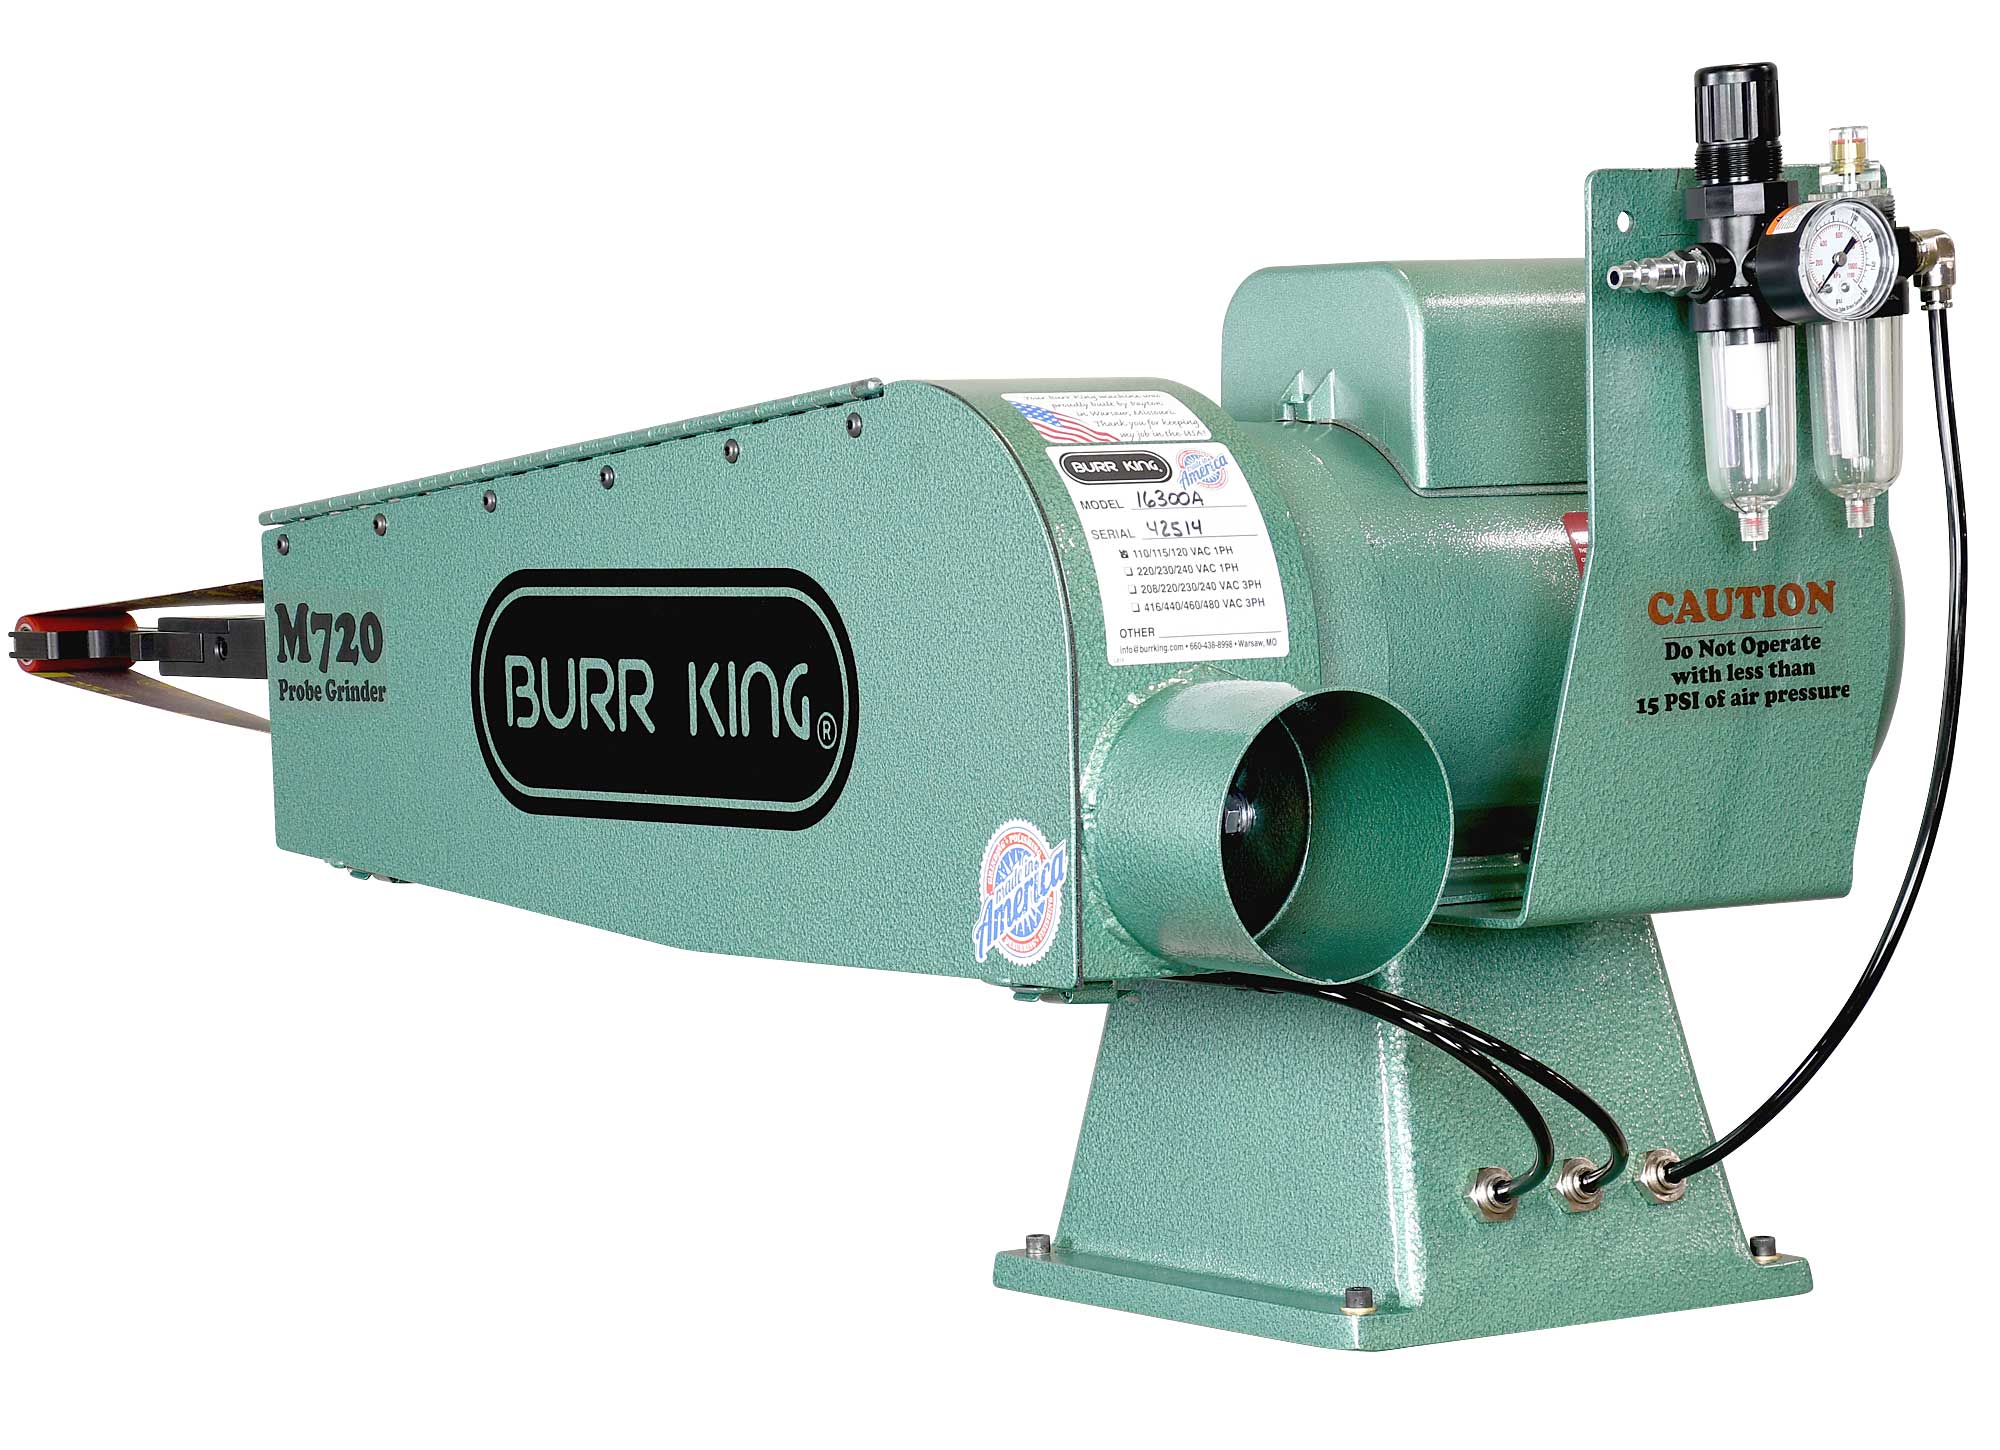 16300A -  Air tension fixed speed M720 probe grinder features air regulator/filter/oilier and a dust extraction point